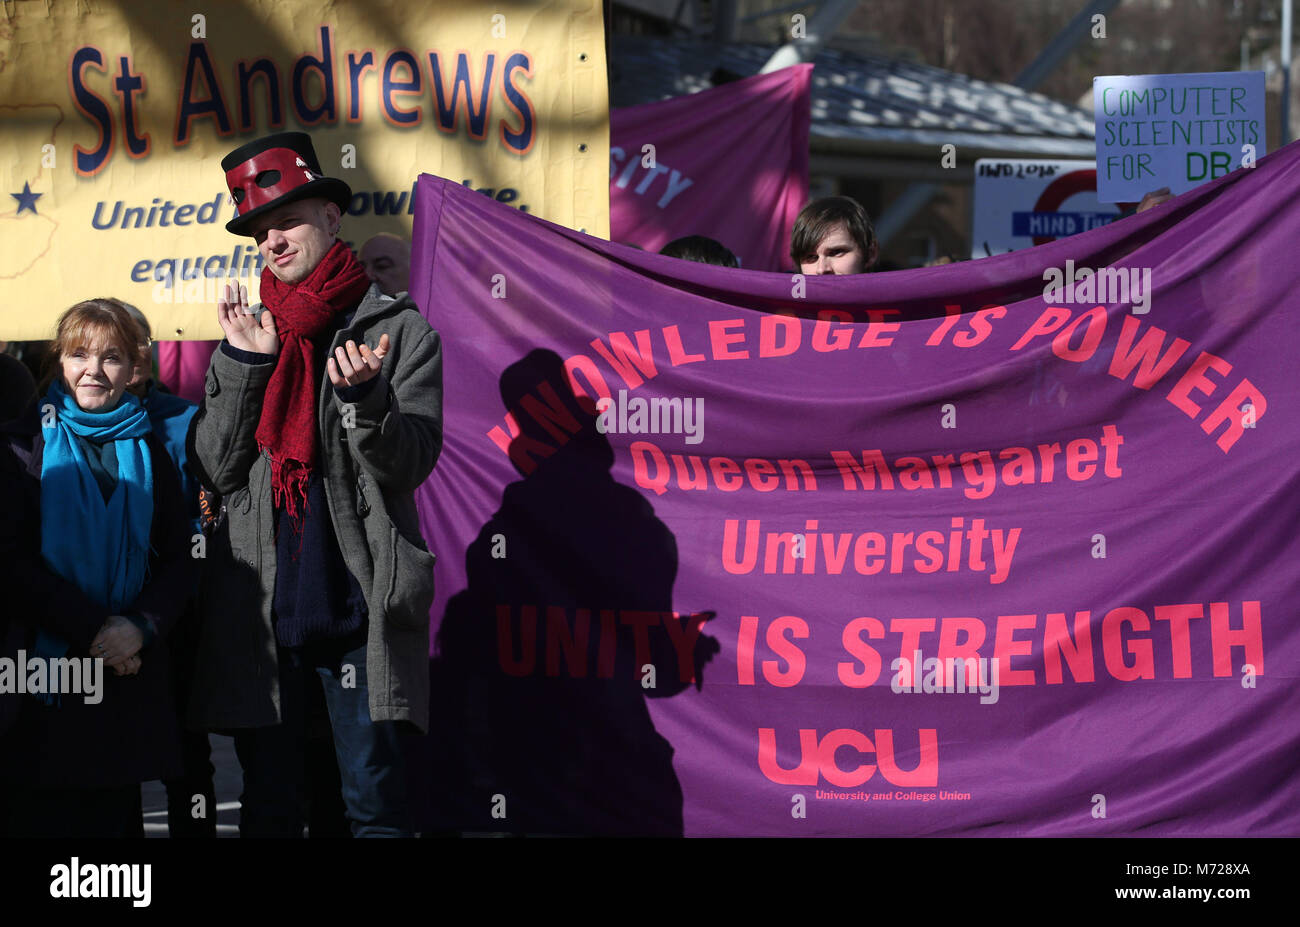 University staff are joined by politicians and students as they hold University pensions row rally outside the Scottish Parliament in Edinburgh as part of their ongoing strike action. Stock Photo